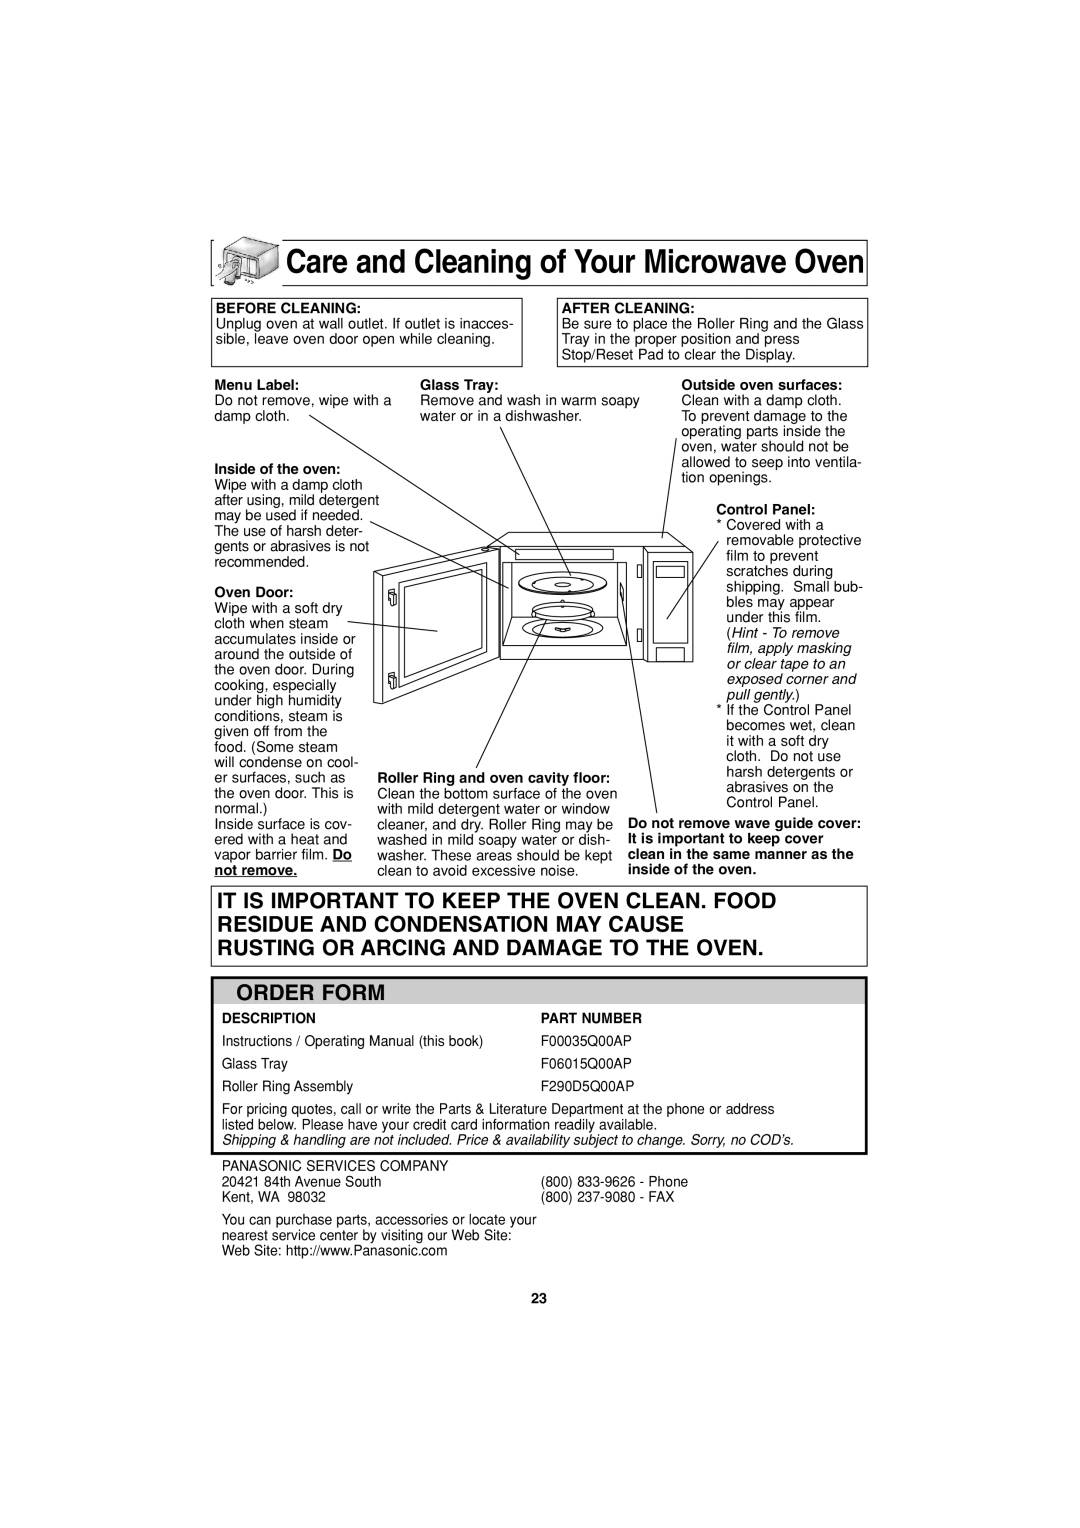 Panasonic NN-S443 Care and Cleaning of Your Microwave Oven, Order Form, Before Cleaning, After Cleaning, Menu Label 